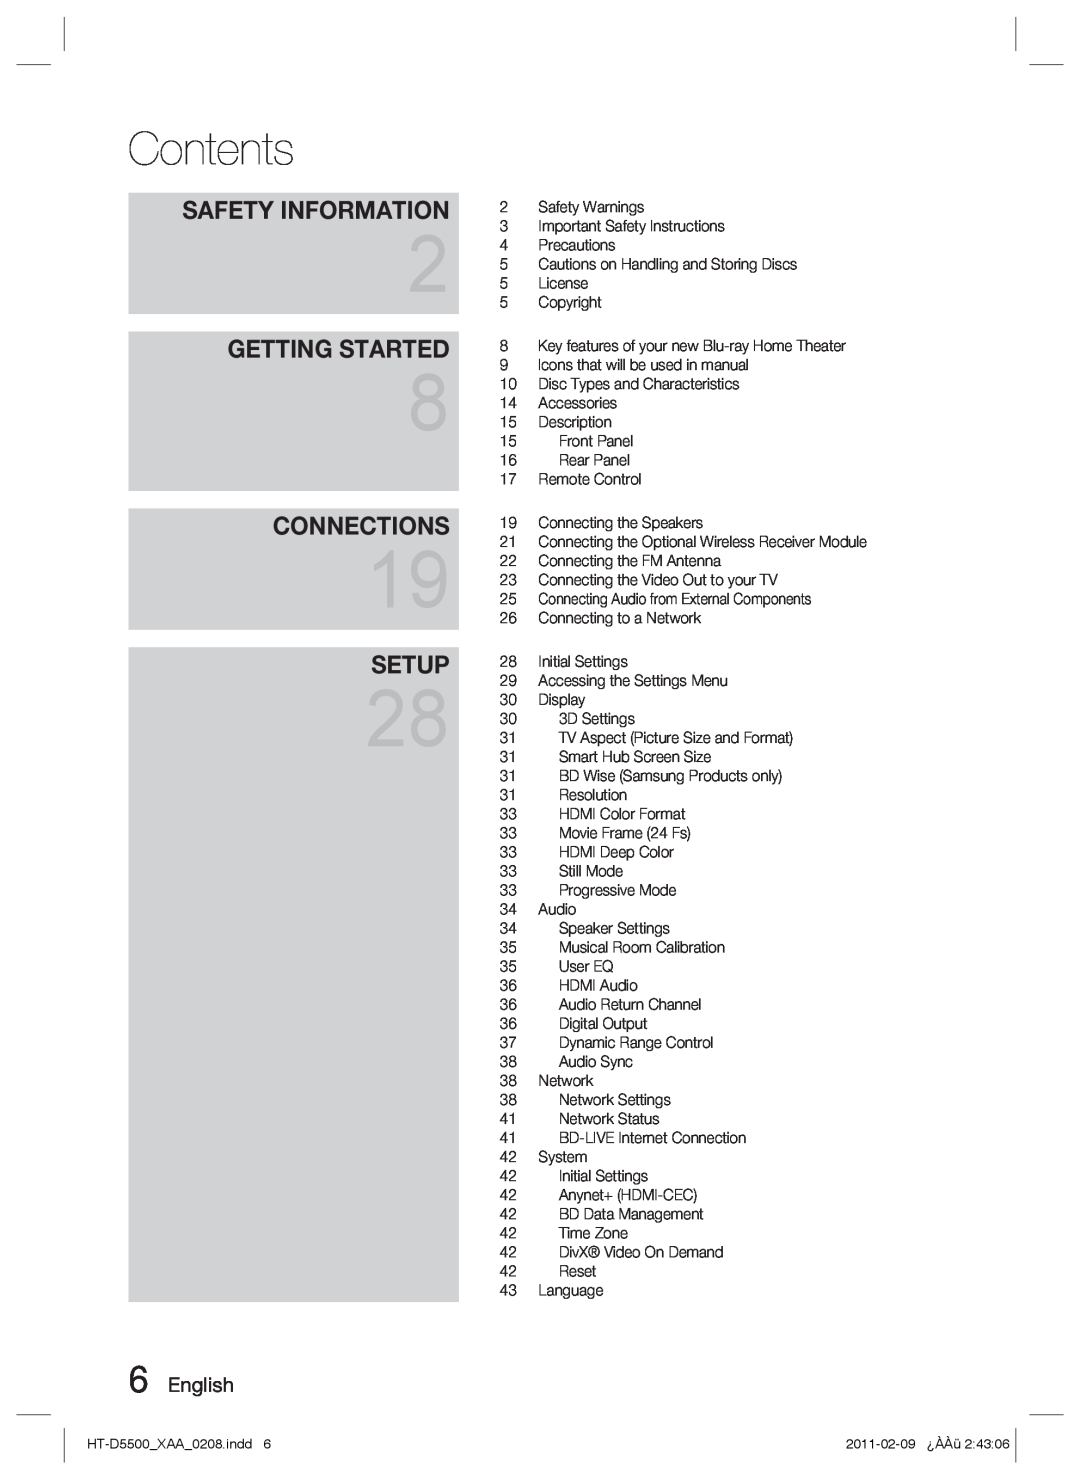 Samsung D5500 user manual Contents, Getting Started, Connections, Setup, Safety Information 